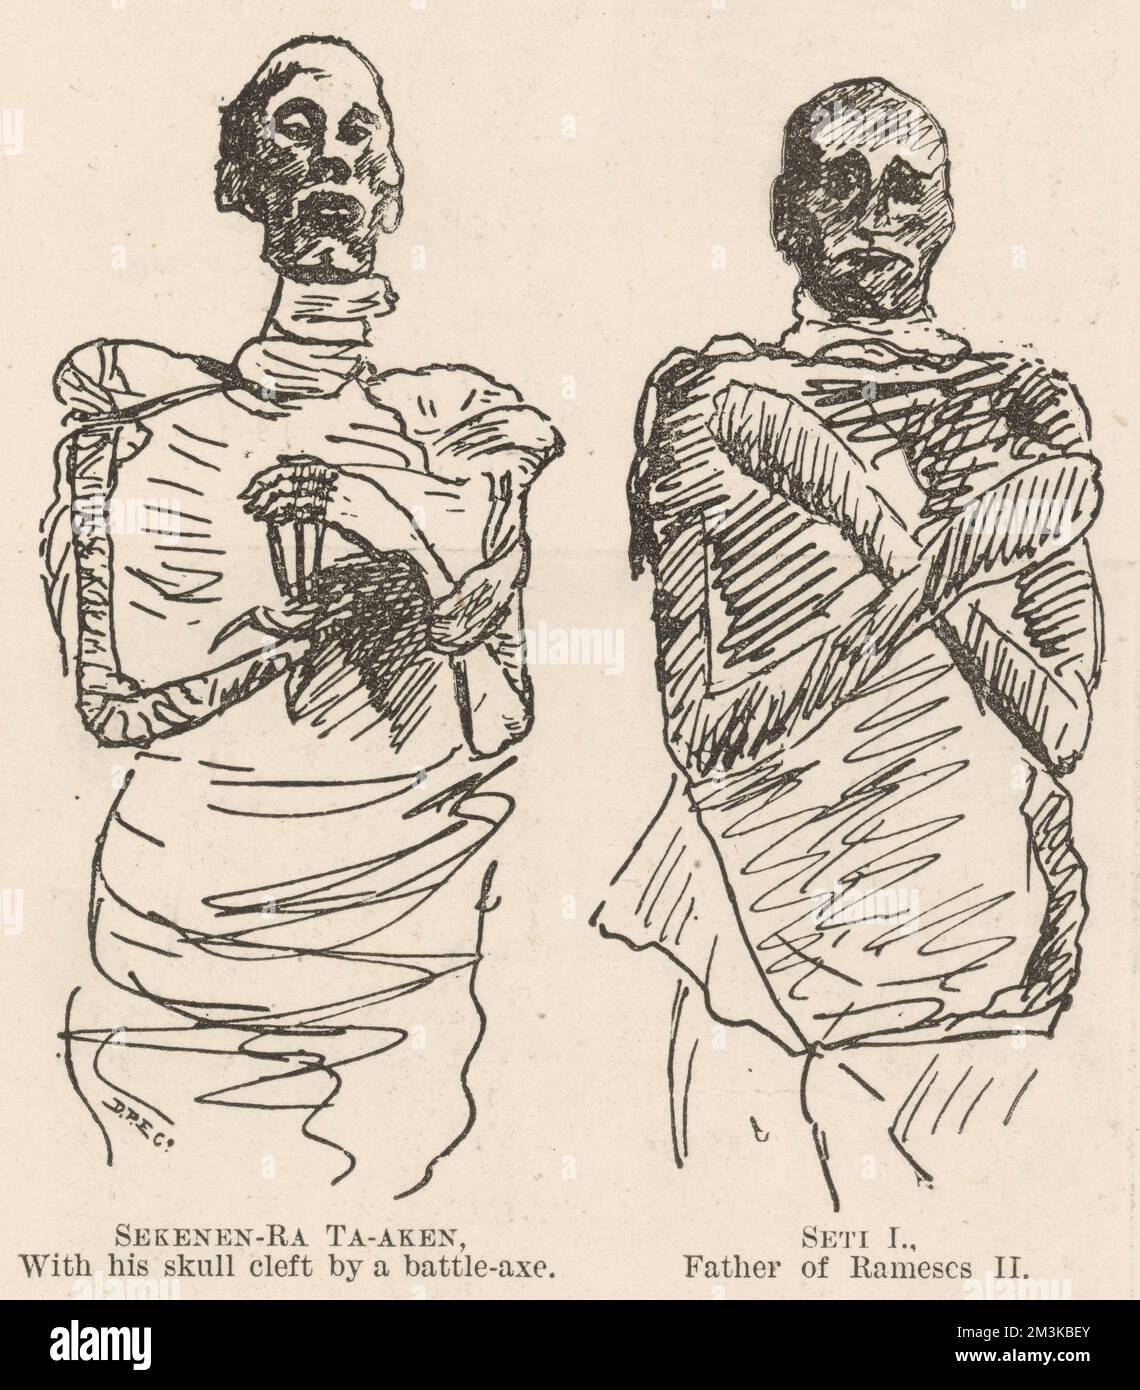 Professor Maspero, Director of Antiquities and Excavations in Egypt, on June 9, in presence of General Sir F. Stephenson and other English officers, at the Boulak Museum, Cairo, unbandaged two ancient mummies discovered in 1881 at Deir-el Bahari, Luxor, Egypt. On the left can be seen the body of 17th Dynasty Pharaoh Sekenen-Ra Ta-aken, with his skull cleft by a battle axe, and on the right the 19th dynasty ruler Seti I, father of Rameses II, with whom he shares an 'astonishing resemblance', the accompanying article claims. After the unwrapping, Seti I  was pronounced to be 'the most beautiful Stock Photo